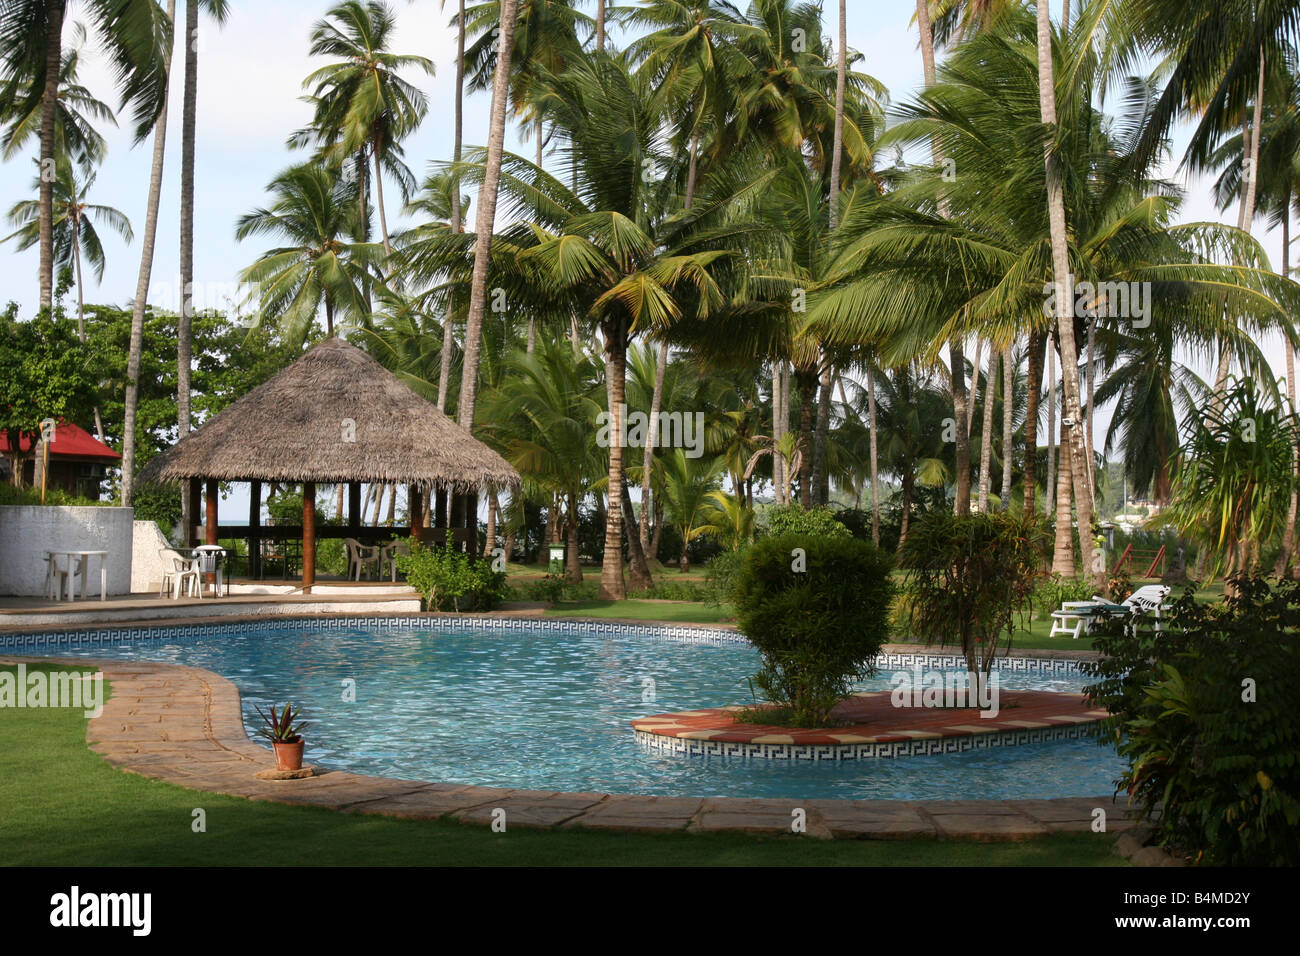 Swimming pool at the Marlin Beach Hotel in São Tomé, the capital of the Democratic Republic of São Tomé and Príncipe. Stock Photo